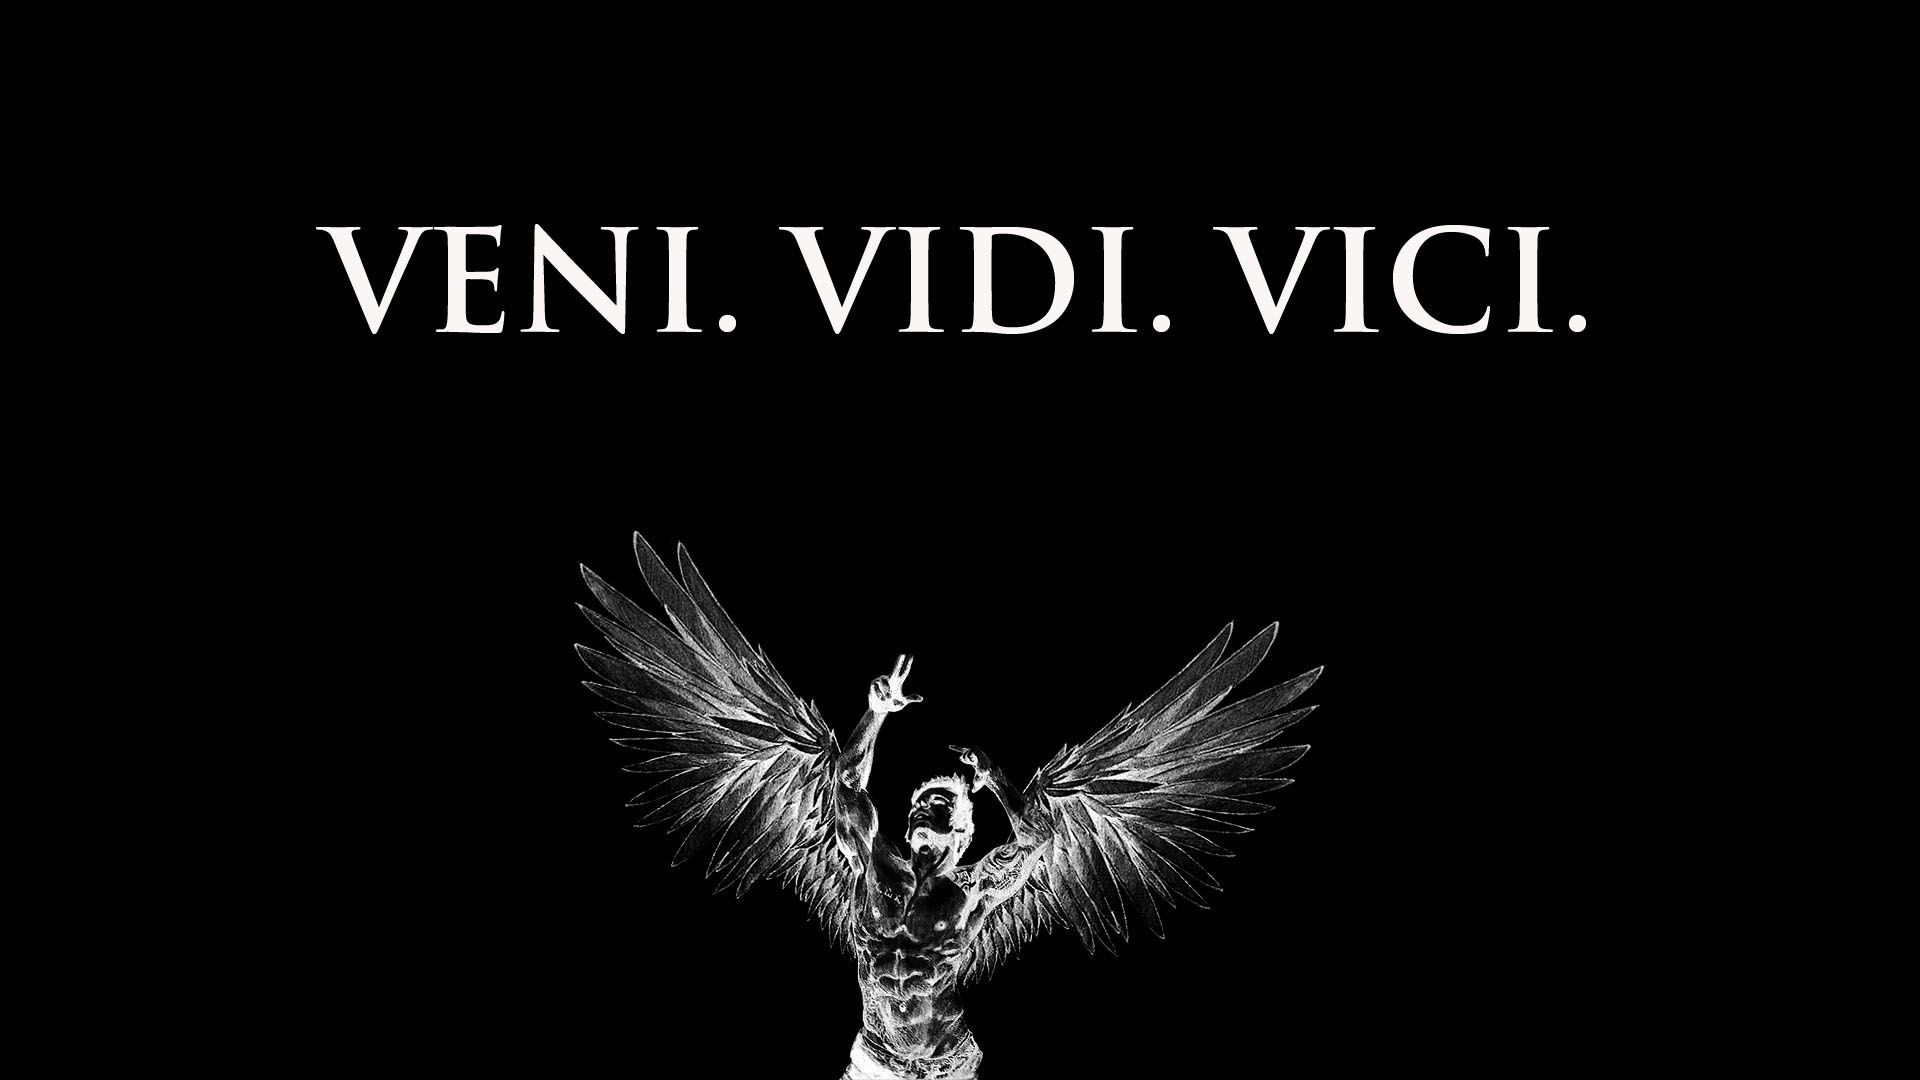 General 1920x1080 quote typography simple background minimalism black background men angel arms up monochrome wings Dark Age